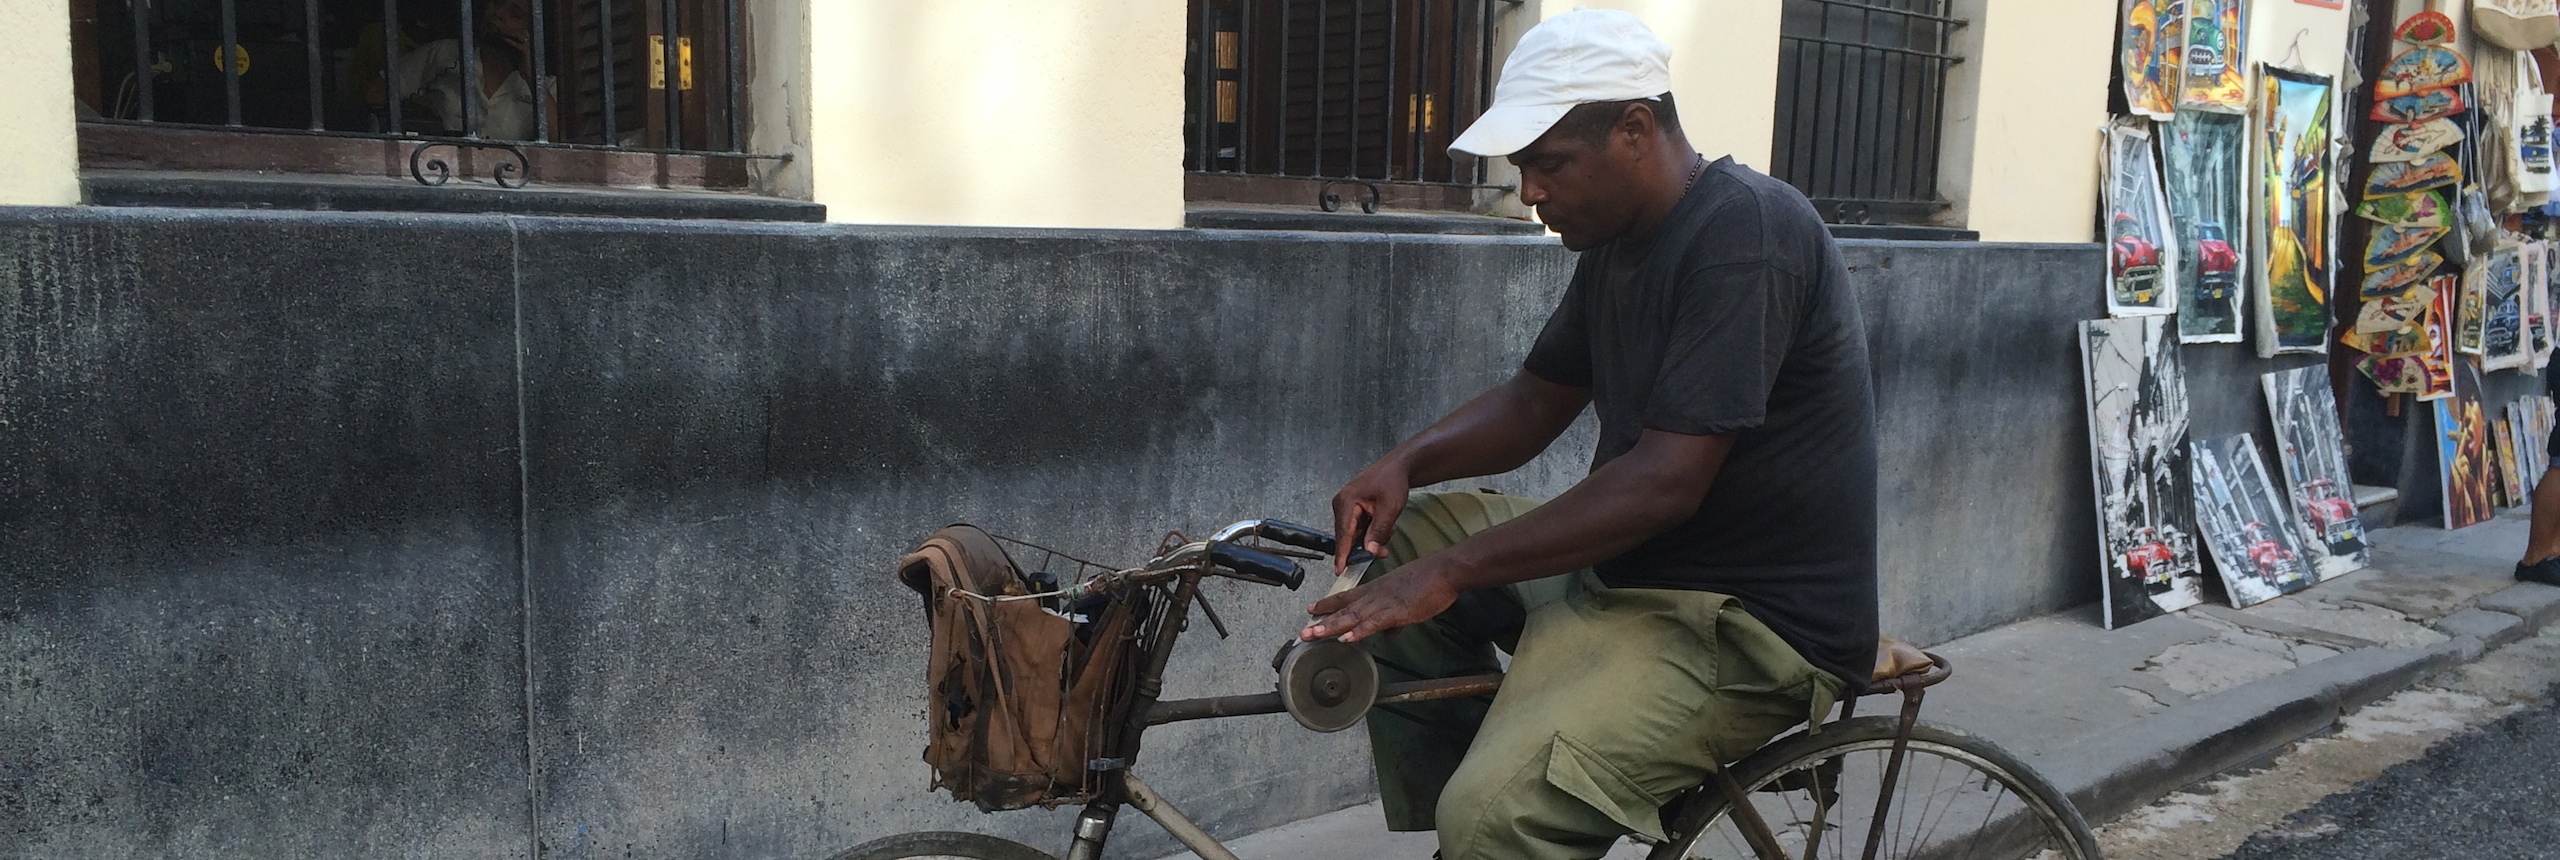 Sharpening knives - what you might see when you take a guided bike tour in Cuba